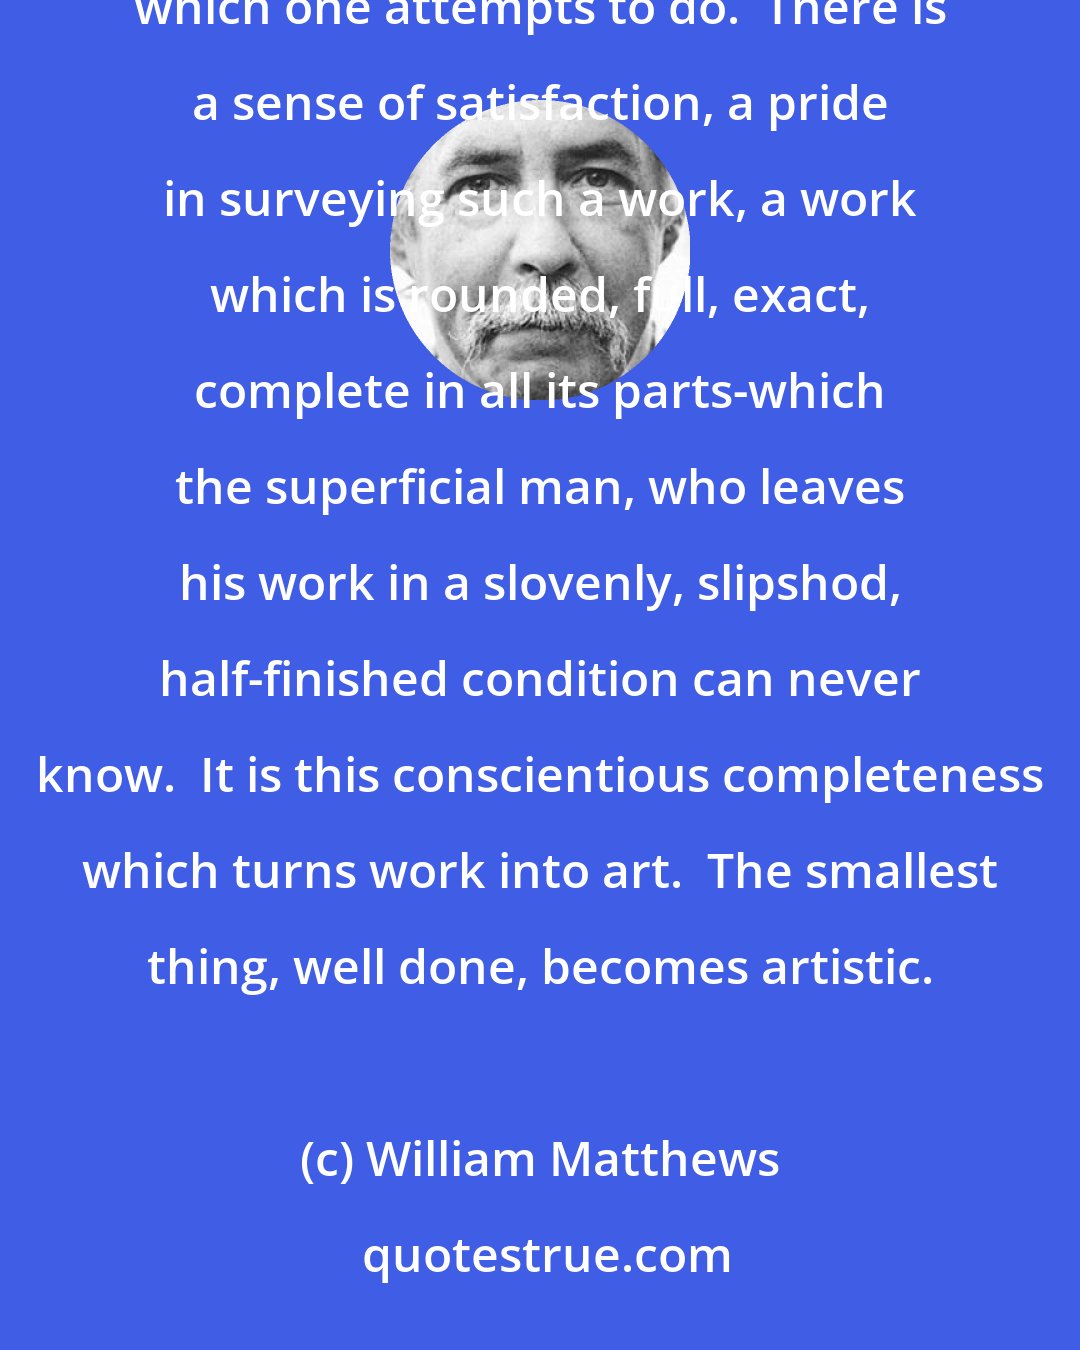 William Matthews: A great deal of the joy of life consists in doing perfectly, or at least to the best of one's ability, everything which one attempts to do.  There is a sense of satisfaction, a pride in surveying such a work, a work which is rounded, full, exact, complete in all its parts-which the superficial man, who leaves his work in a slovenly, slipshod, half-finished condition can never know.  It is this conscientious completeness which turns work into art.  The smallest thing, well done, becomes artistic.